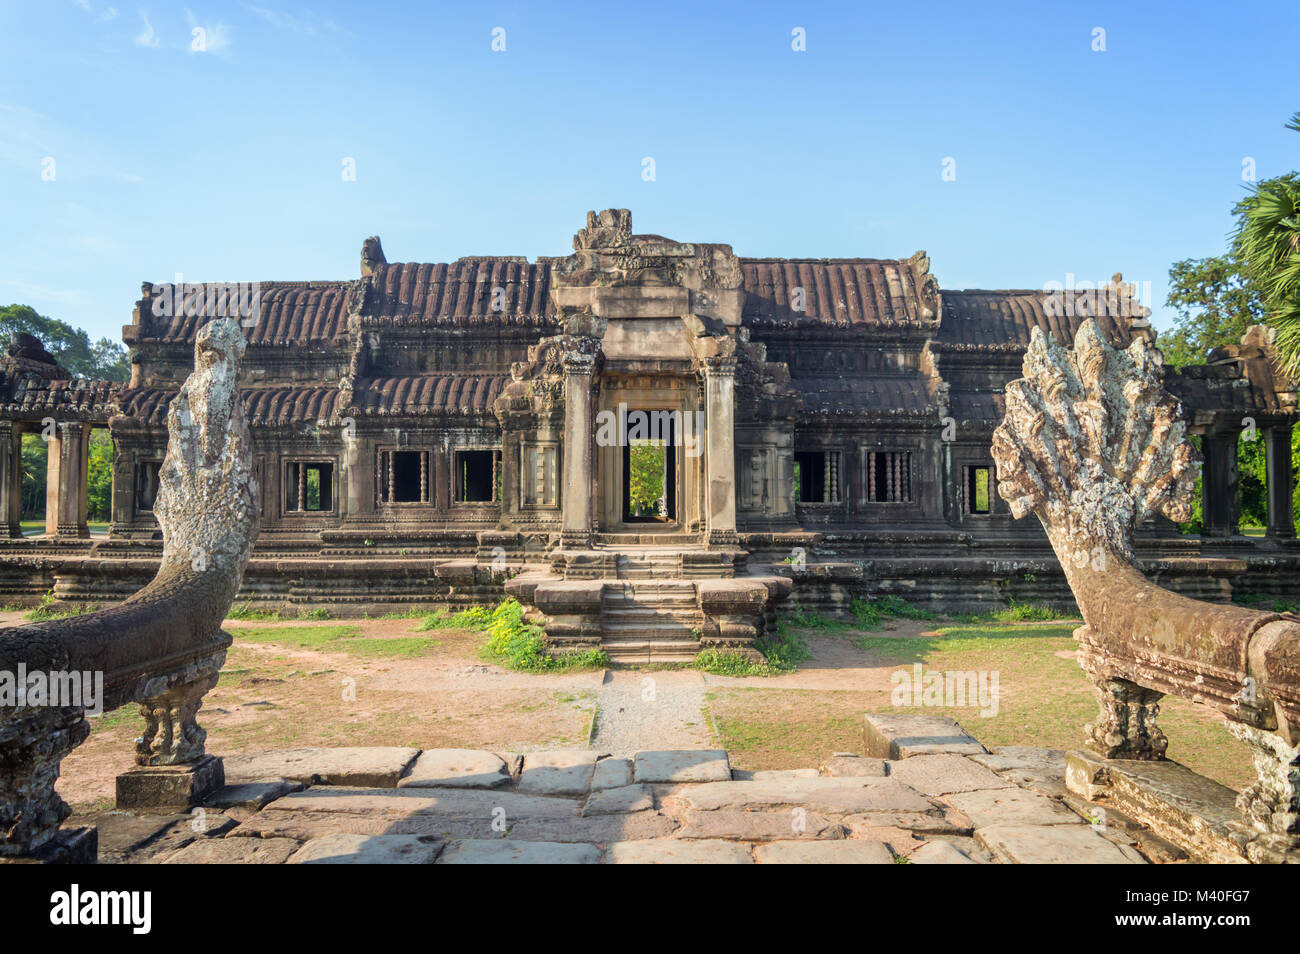 Ancient temple in Angkor Wat, Siem Rep, Cambodia Stock Photo